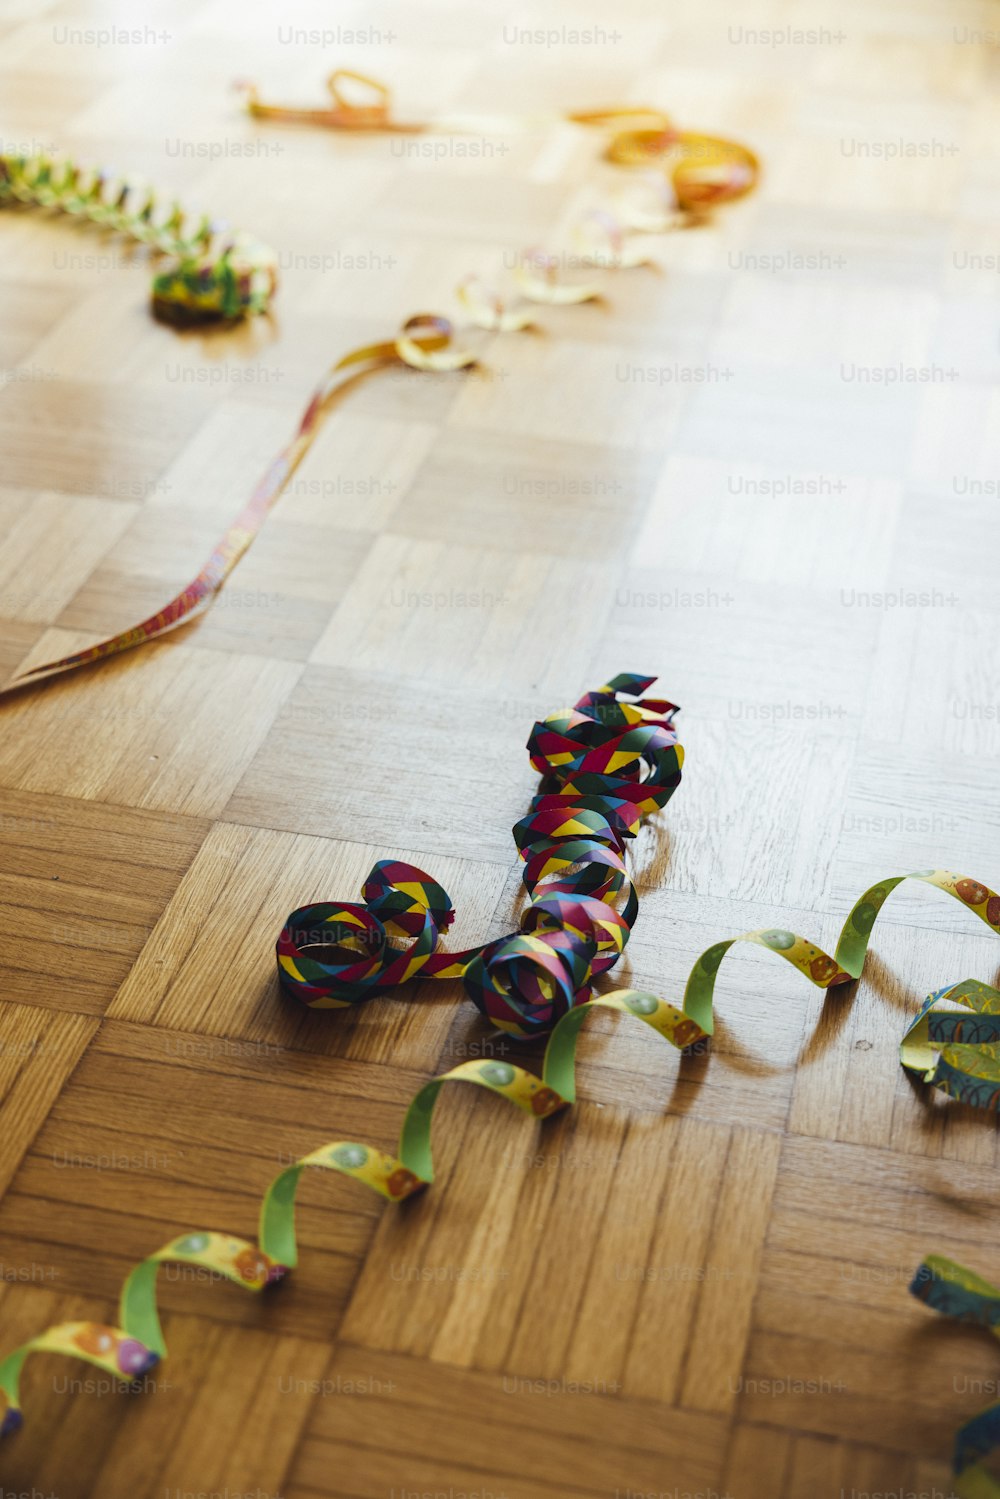 colorful streamers of streamers on a wooden floor